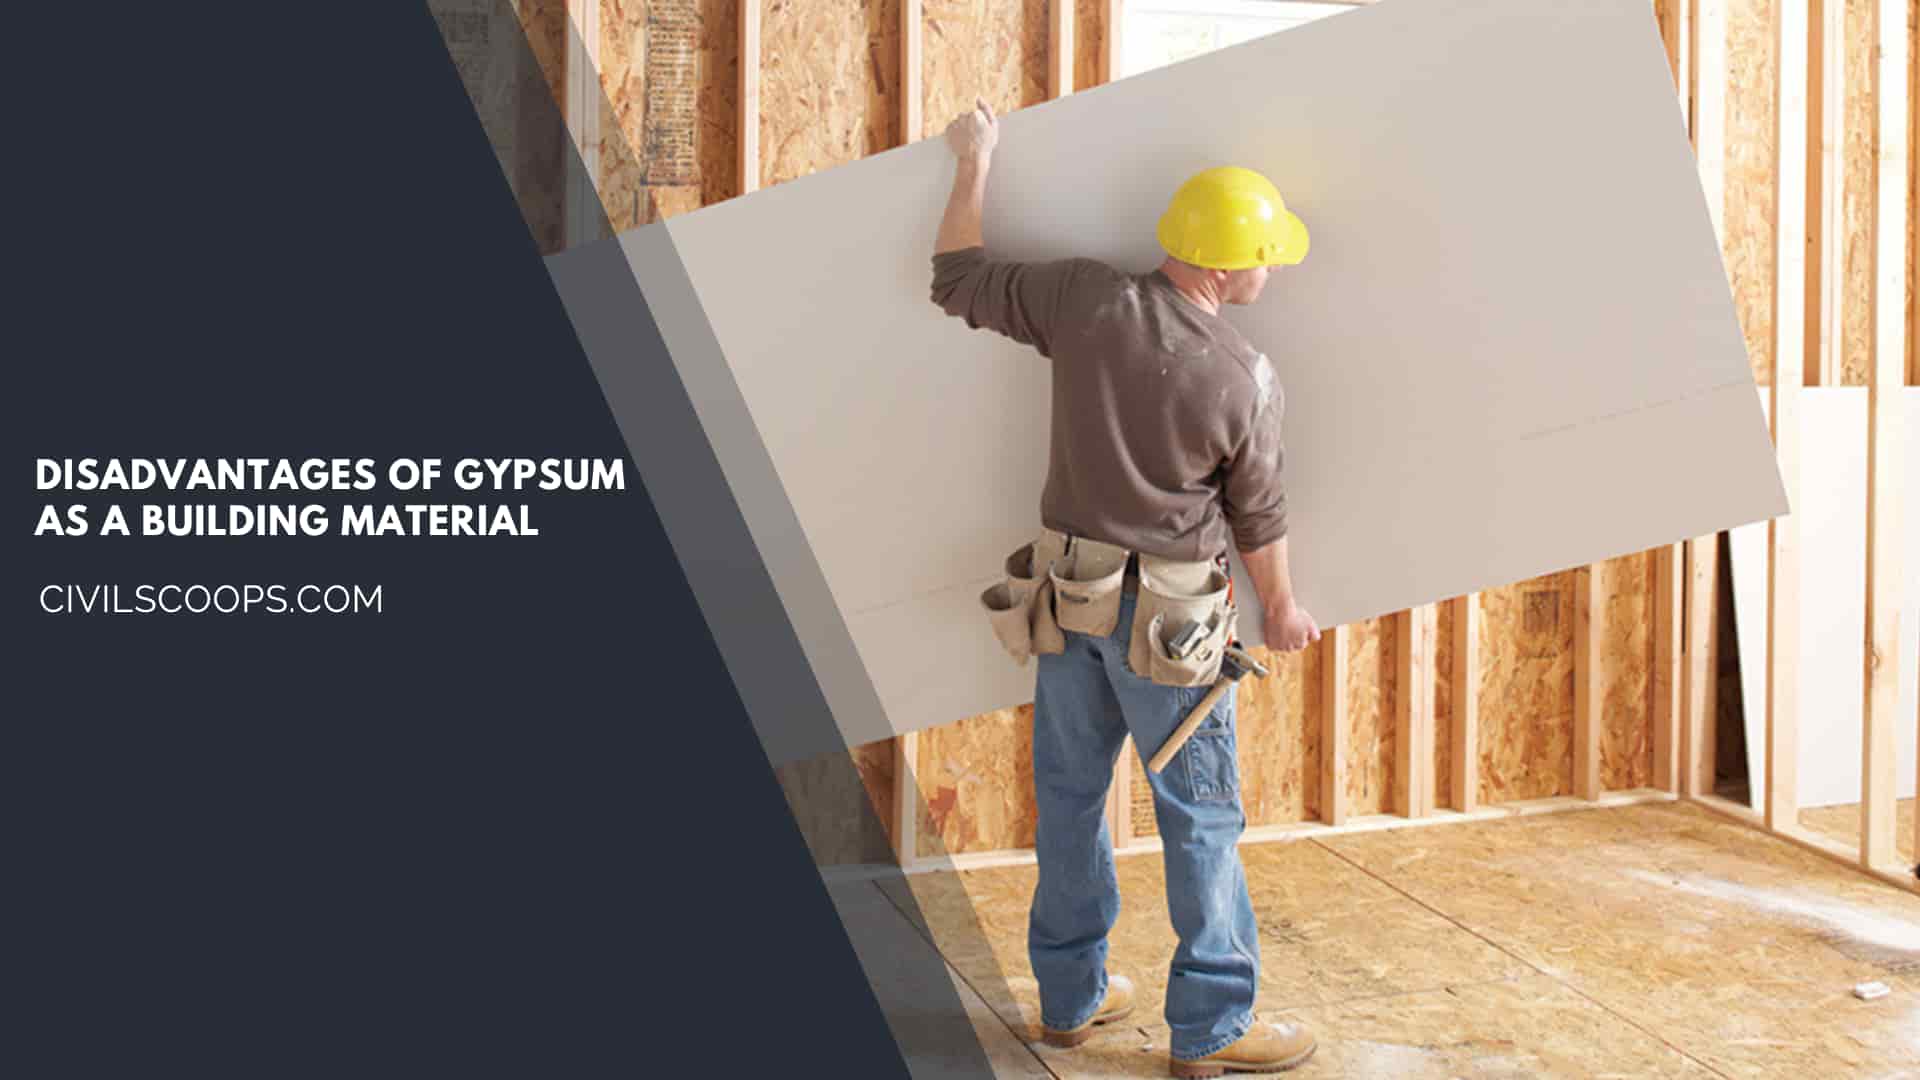 Disadvantages of Gypsum as a Building Material